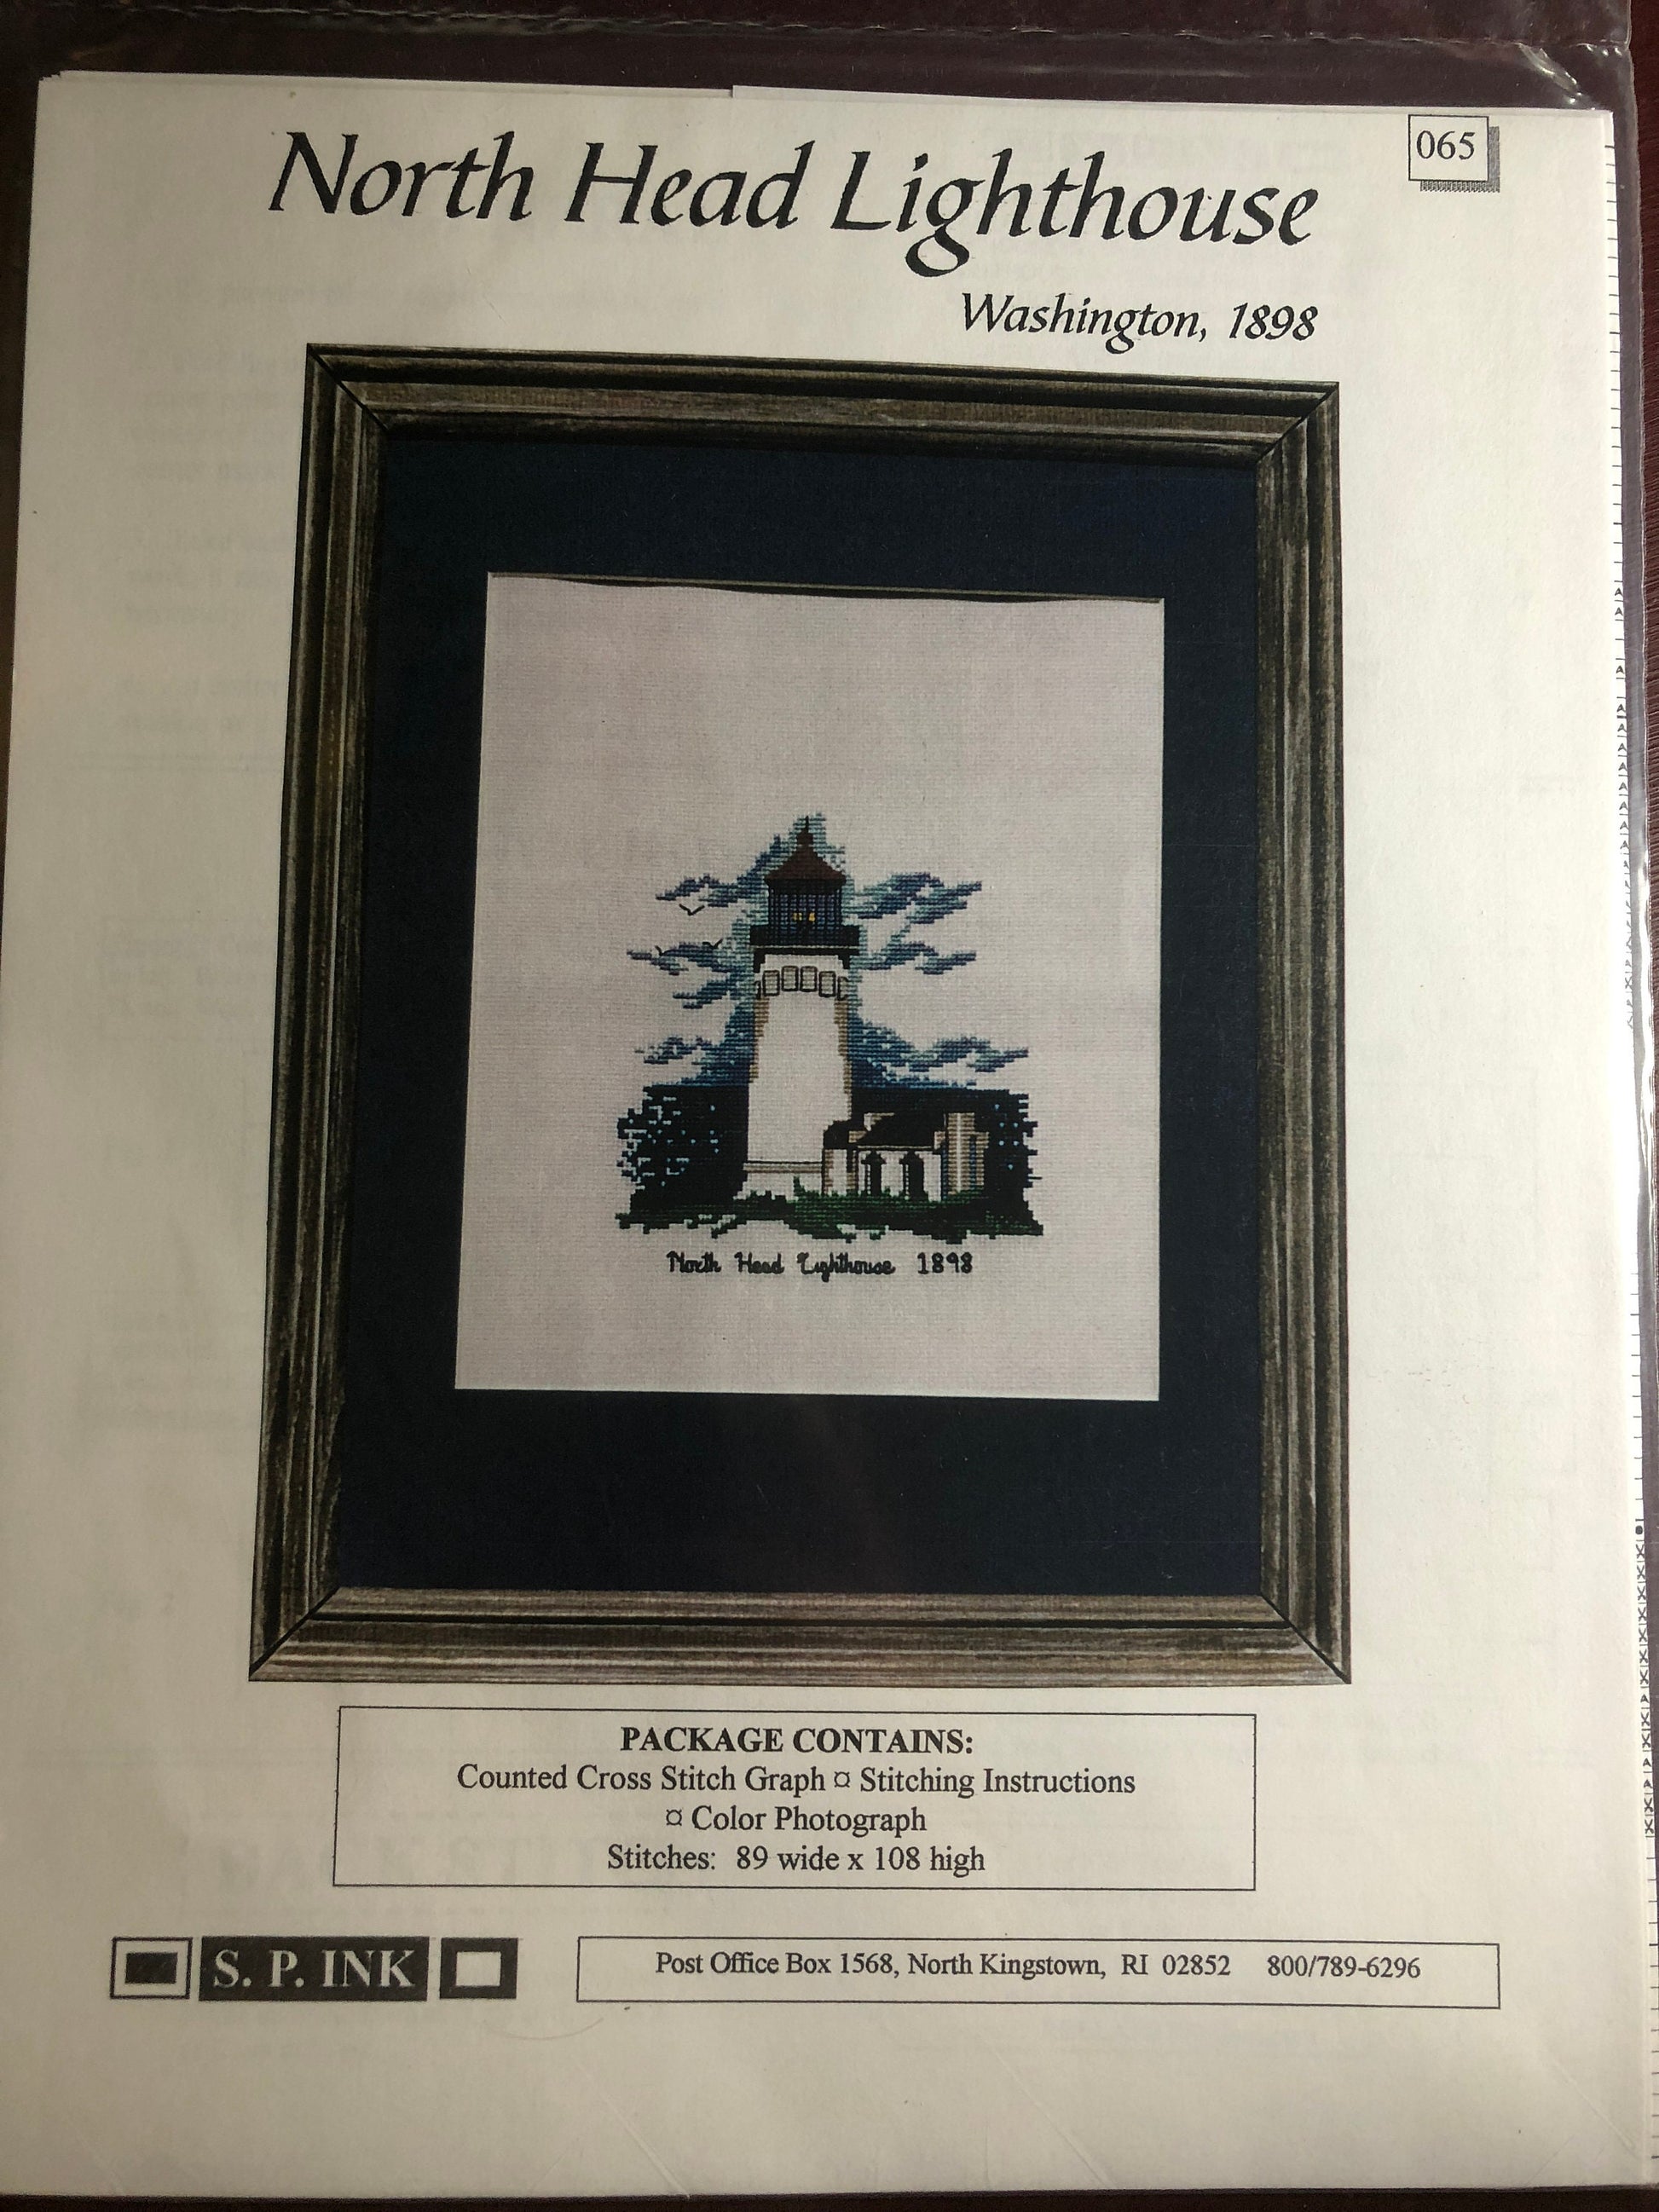 S.P. Ink, Lighthouse V, North Head Light, Washington, 1898, Vintage, Counted, Cross Stitch Pattern, Stitch Count, 89 by 108